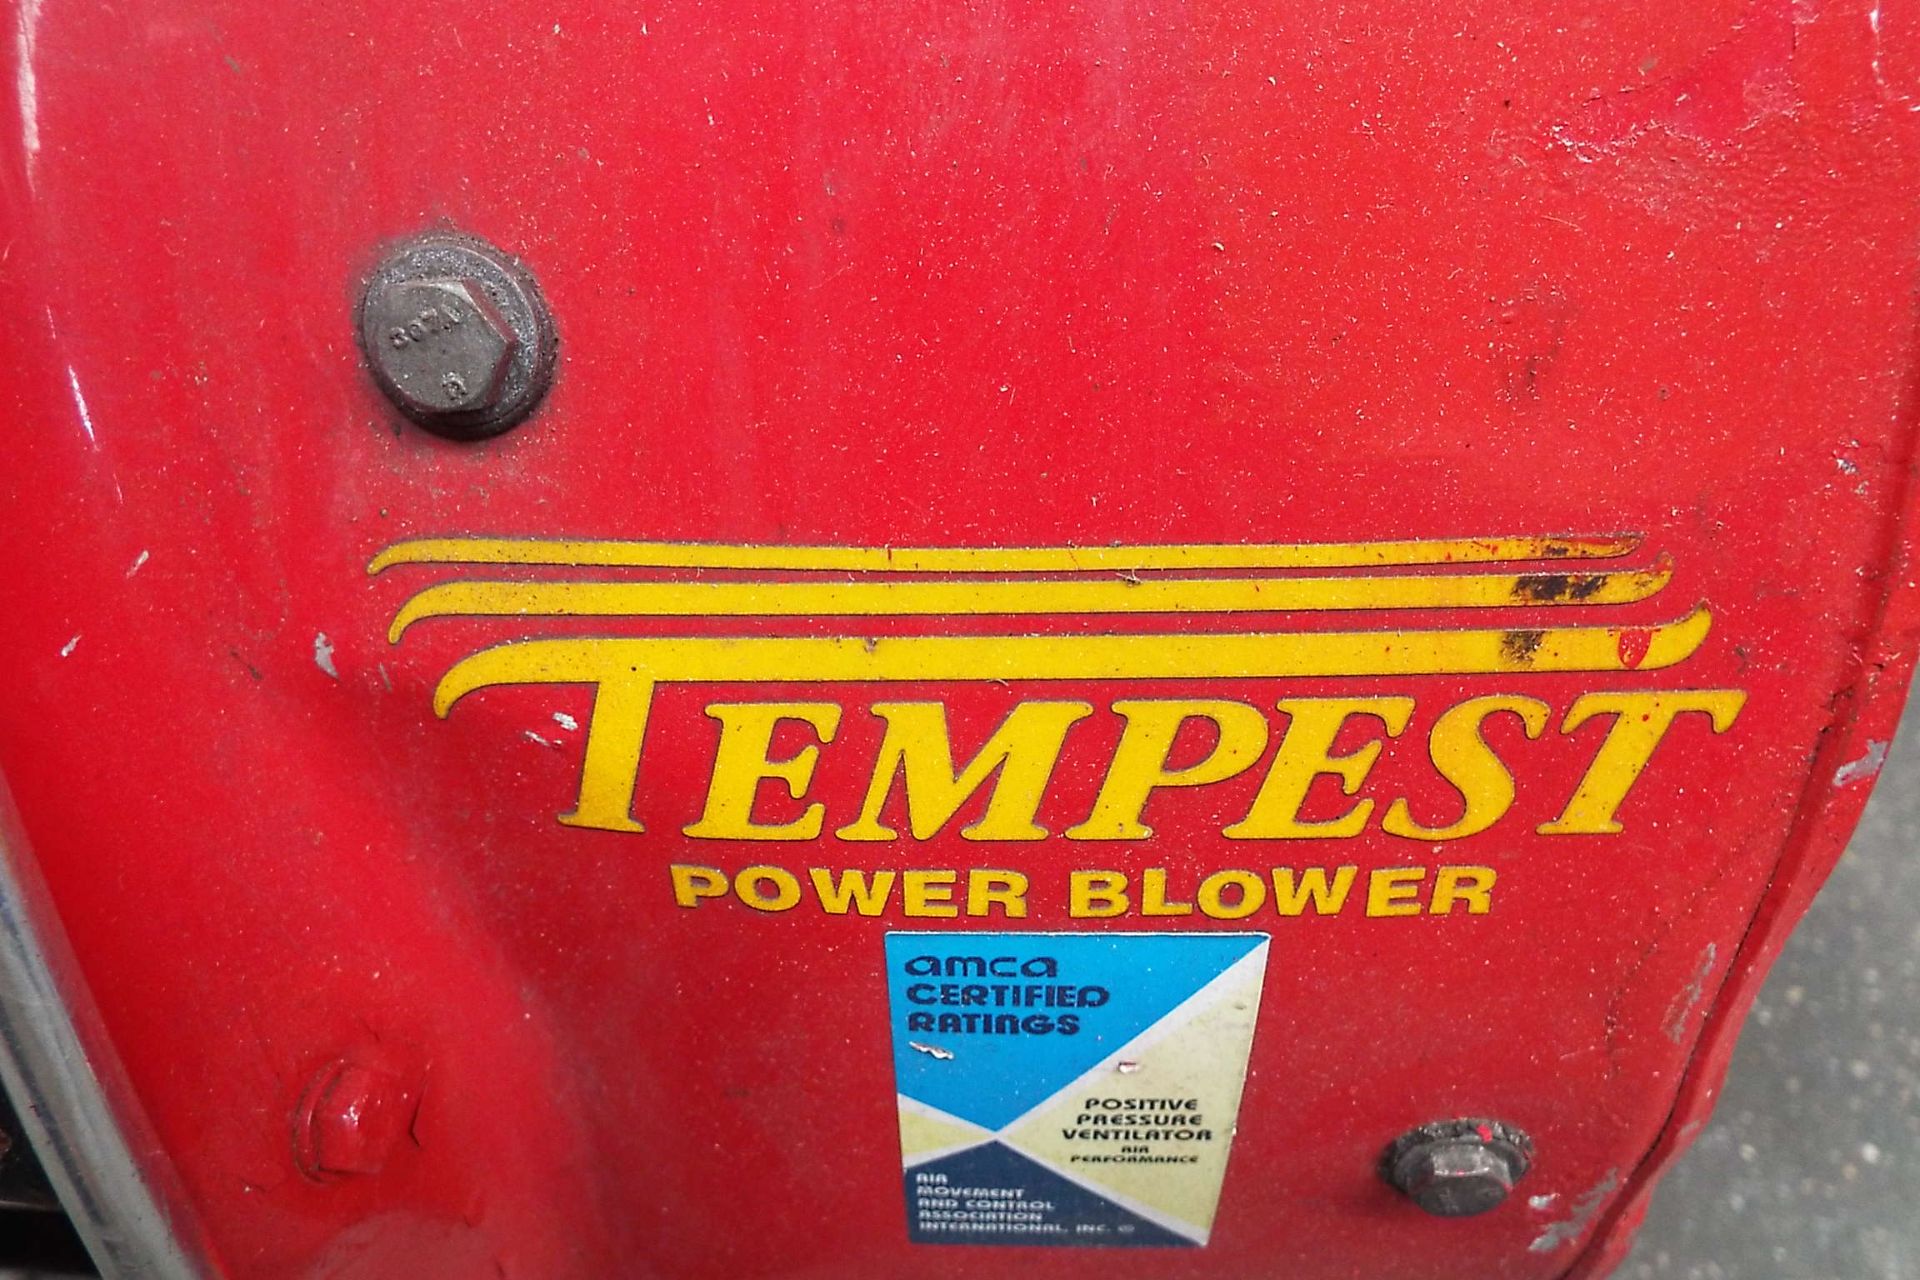 Tempest 21" Power Blower - Image 7 of 7